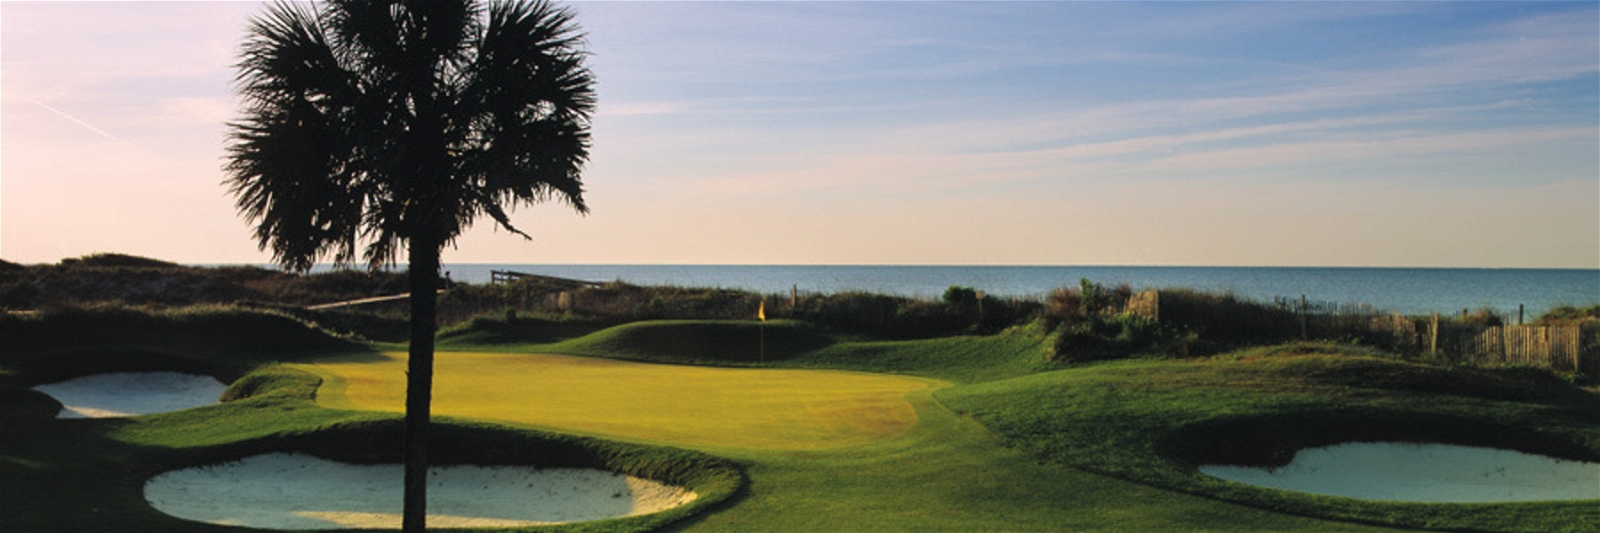 Golf Vacation Package - Kiawah Island Resort - Home of the 2021 PGA Championship - Premier Stay and Play!!